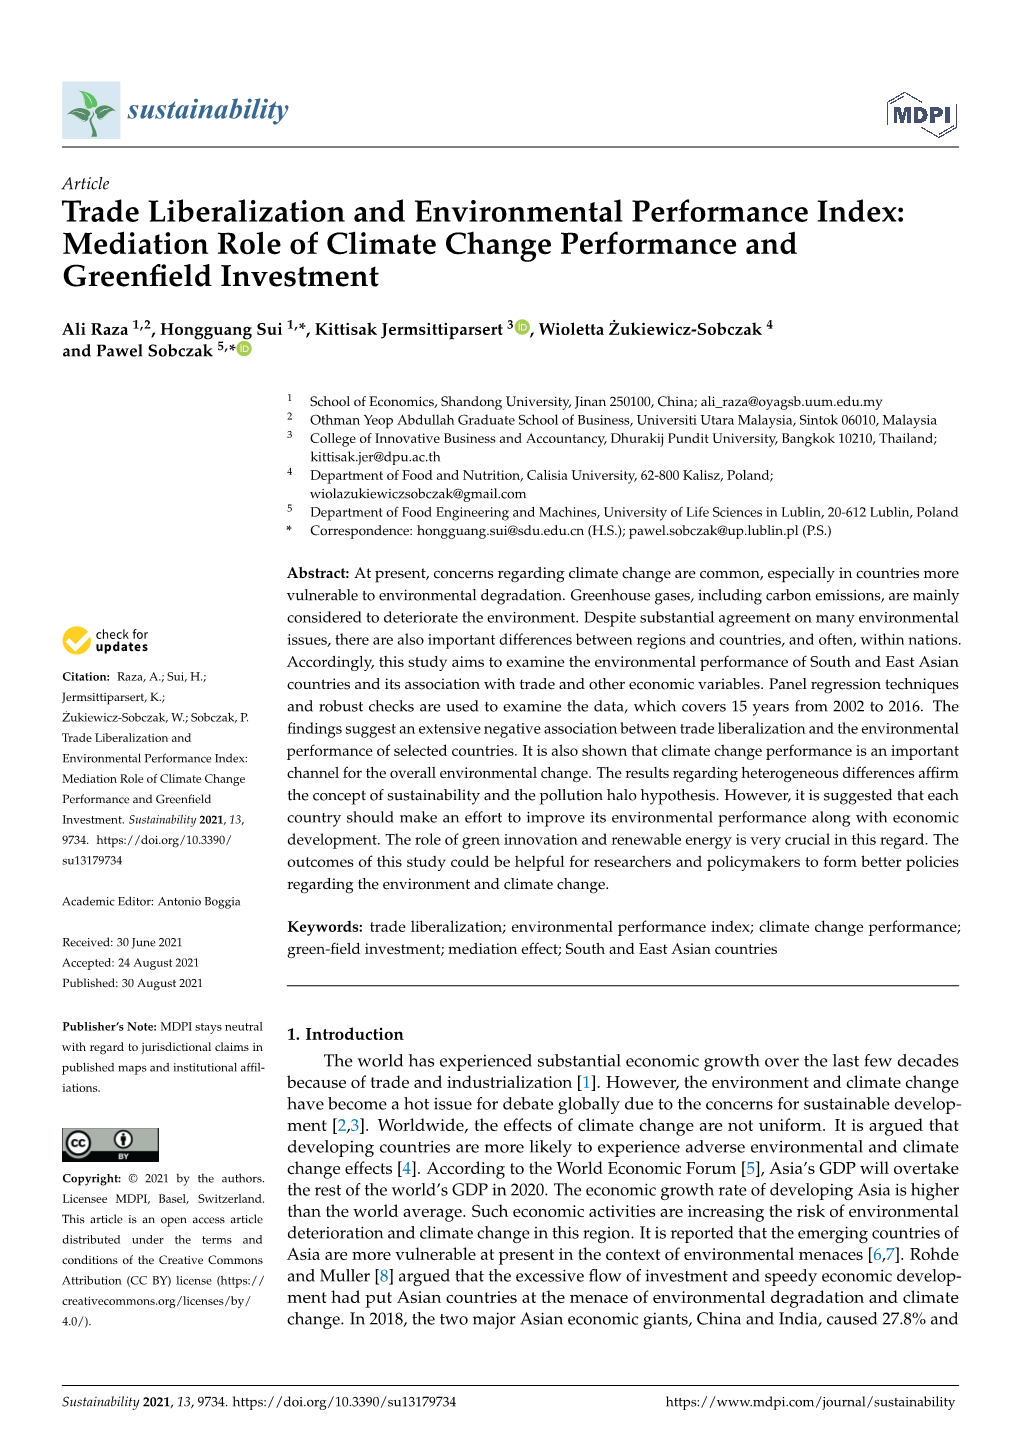 Trade Liberalization and Environmental Performance Index: Mediation Role of Climate Change Performance and Greenﬁeld Investment